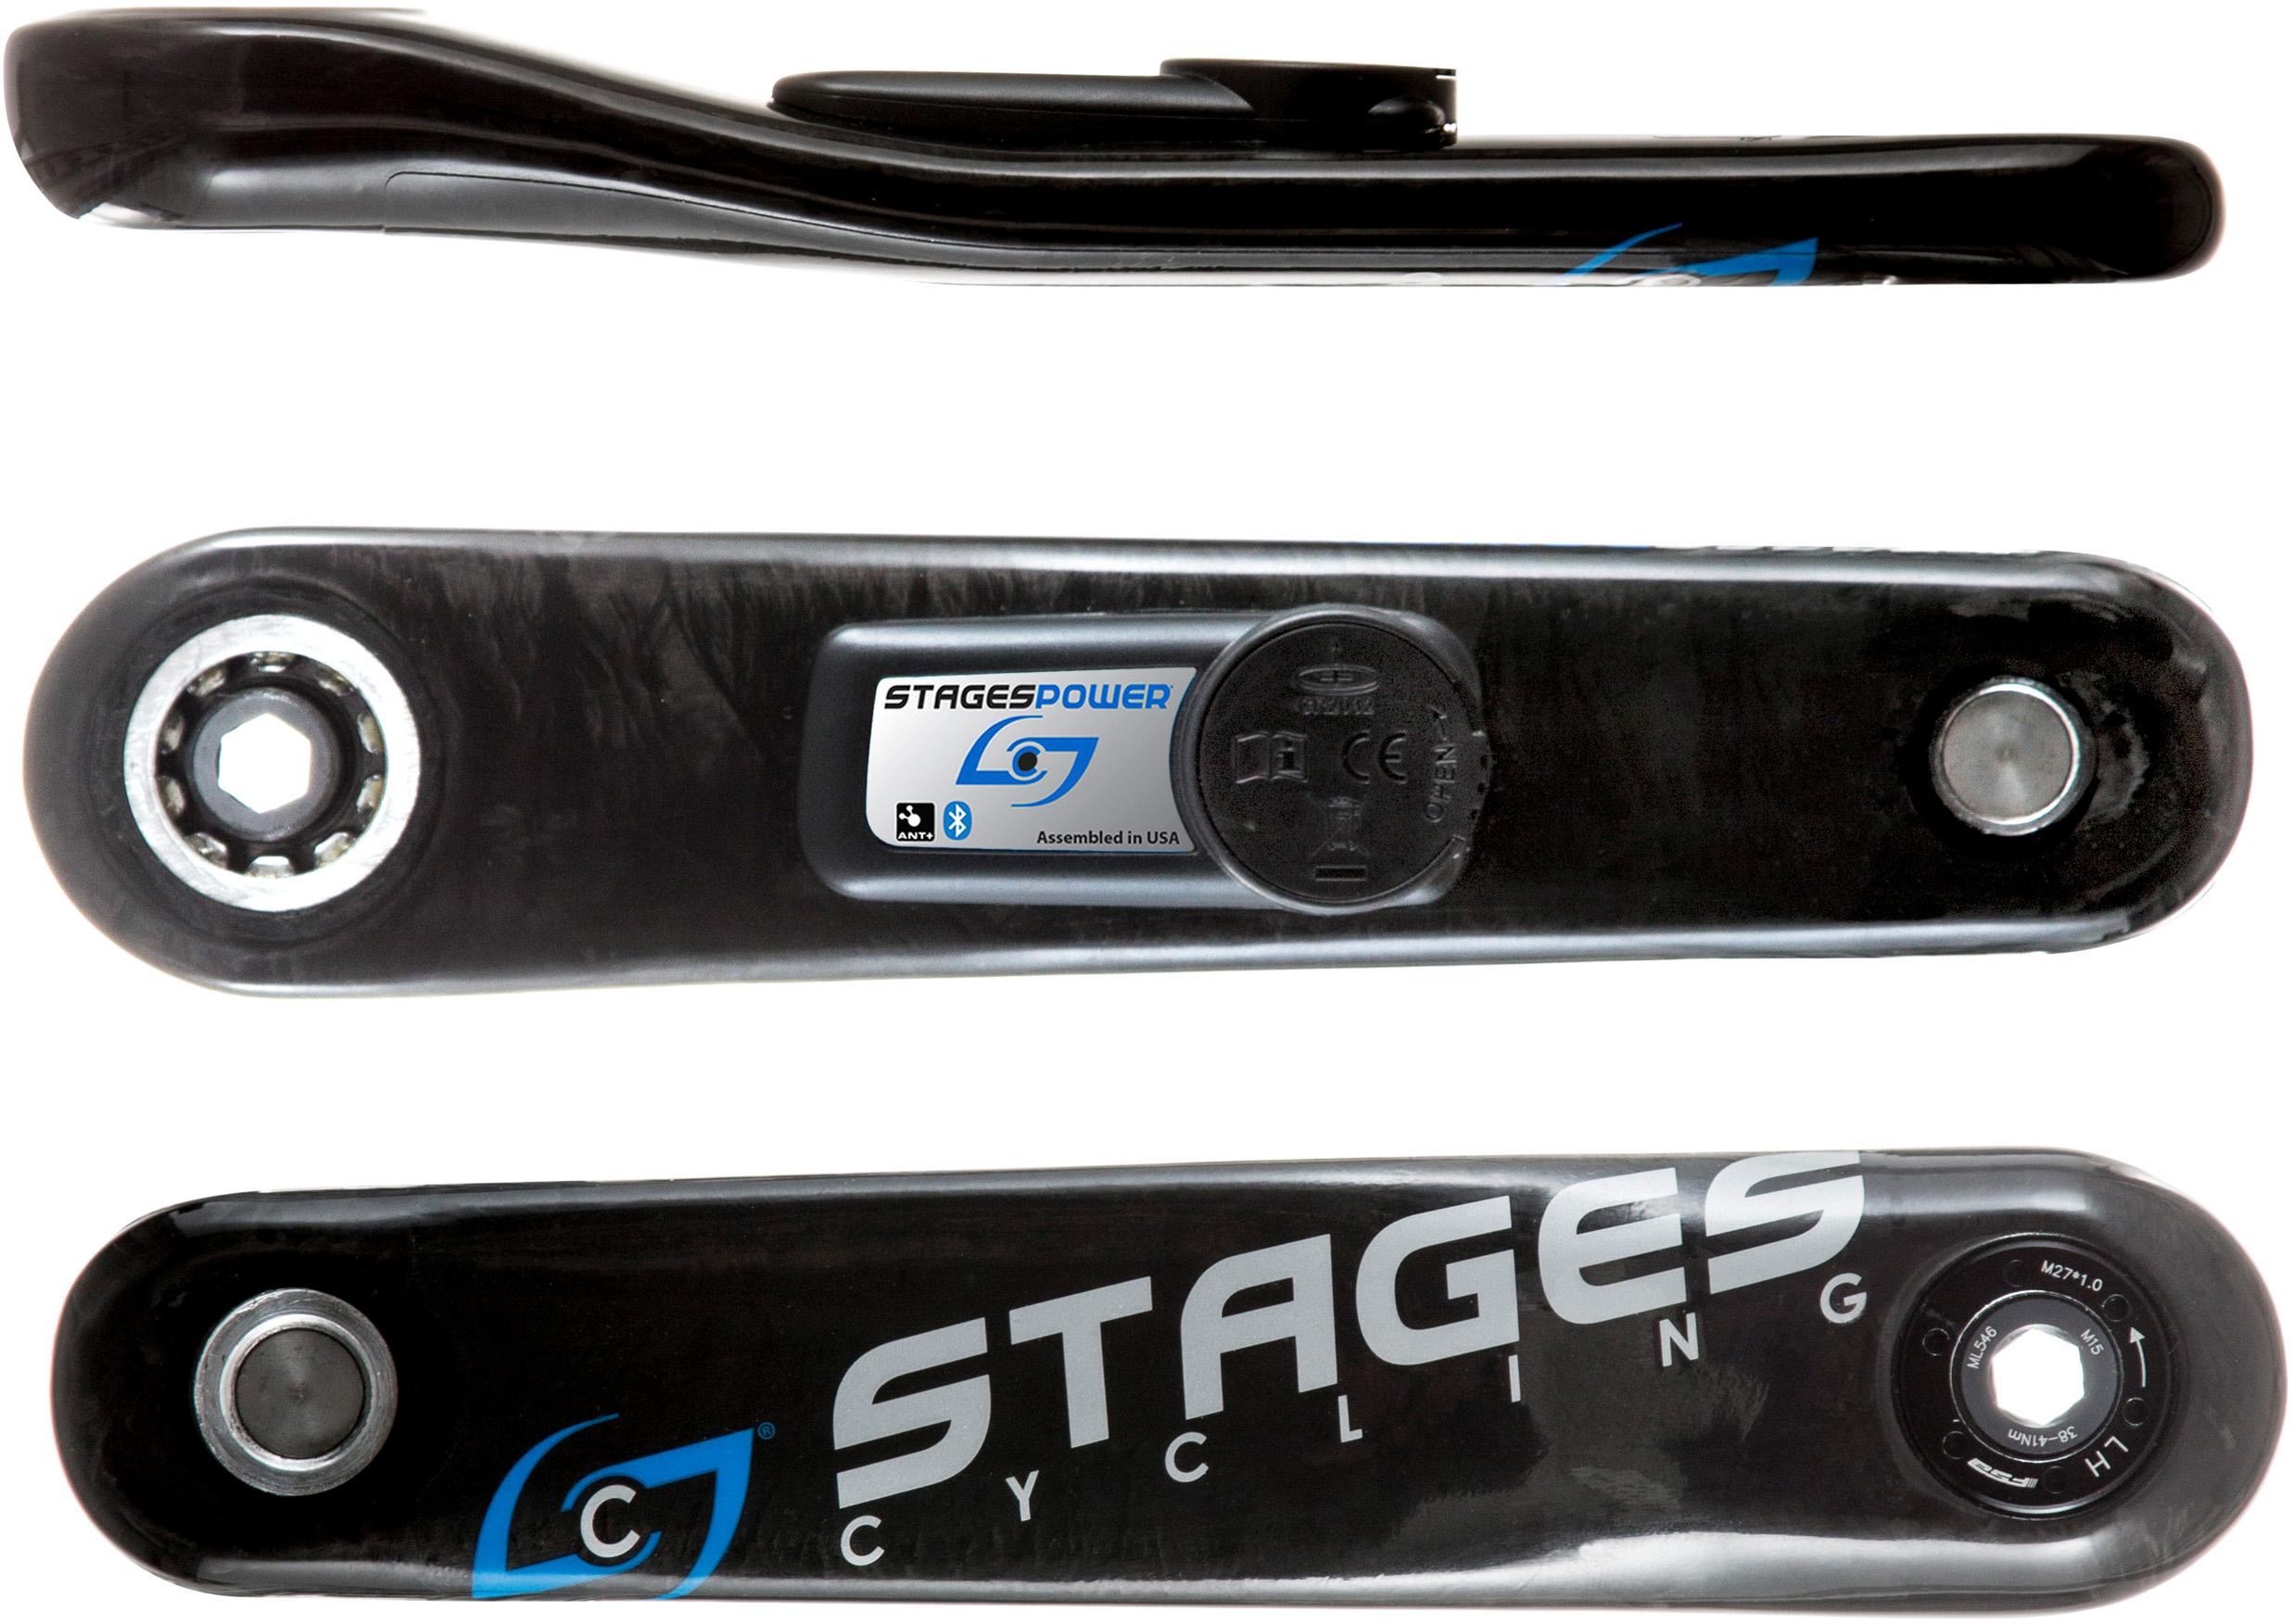 Stages Cycling Power G3 L - Stages Carbon Gxp Mtb - Black